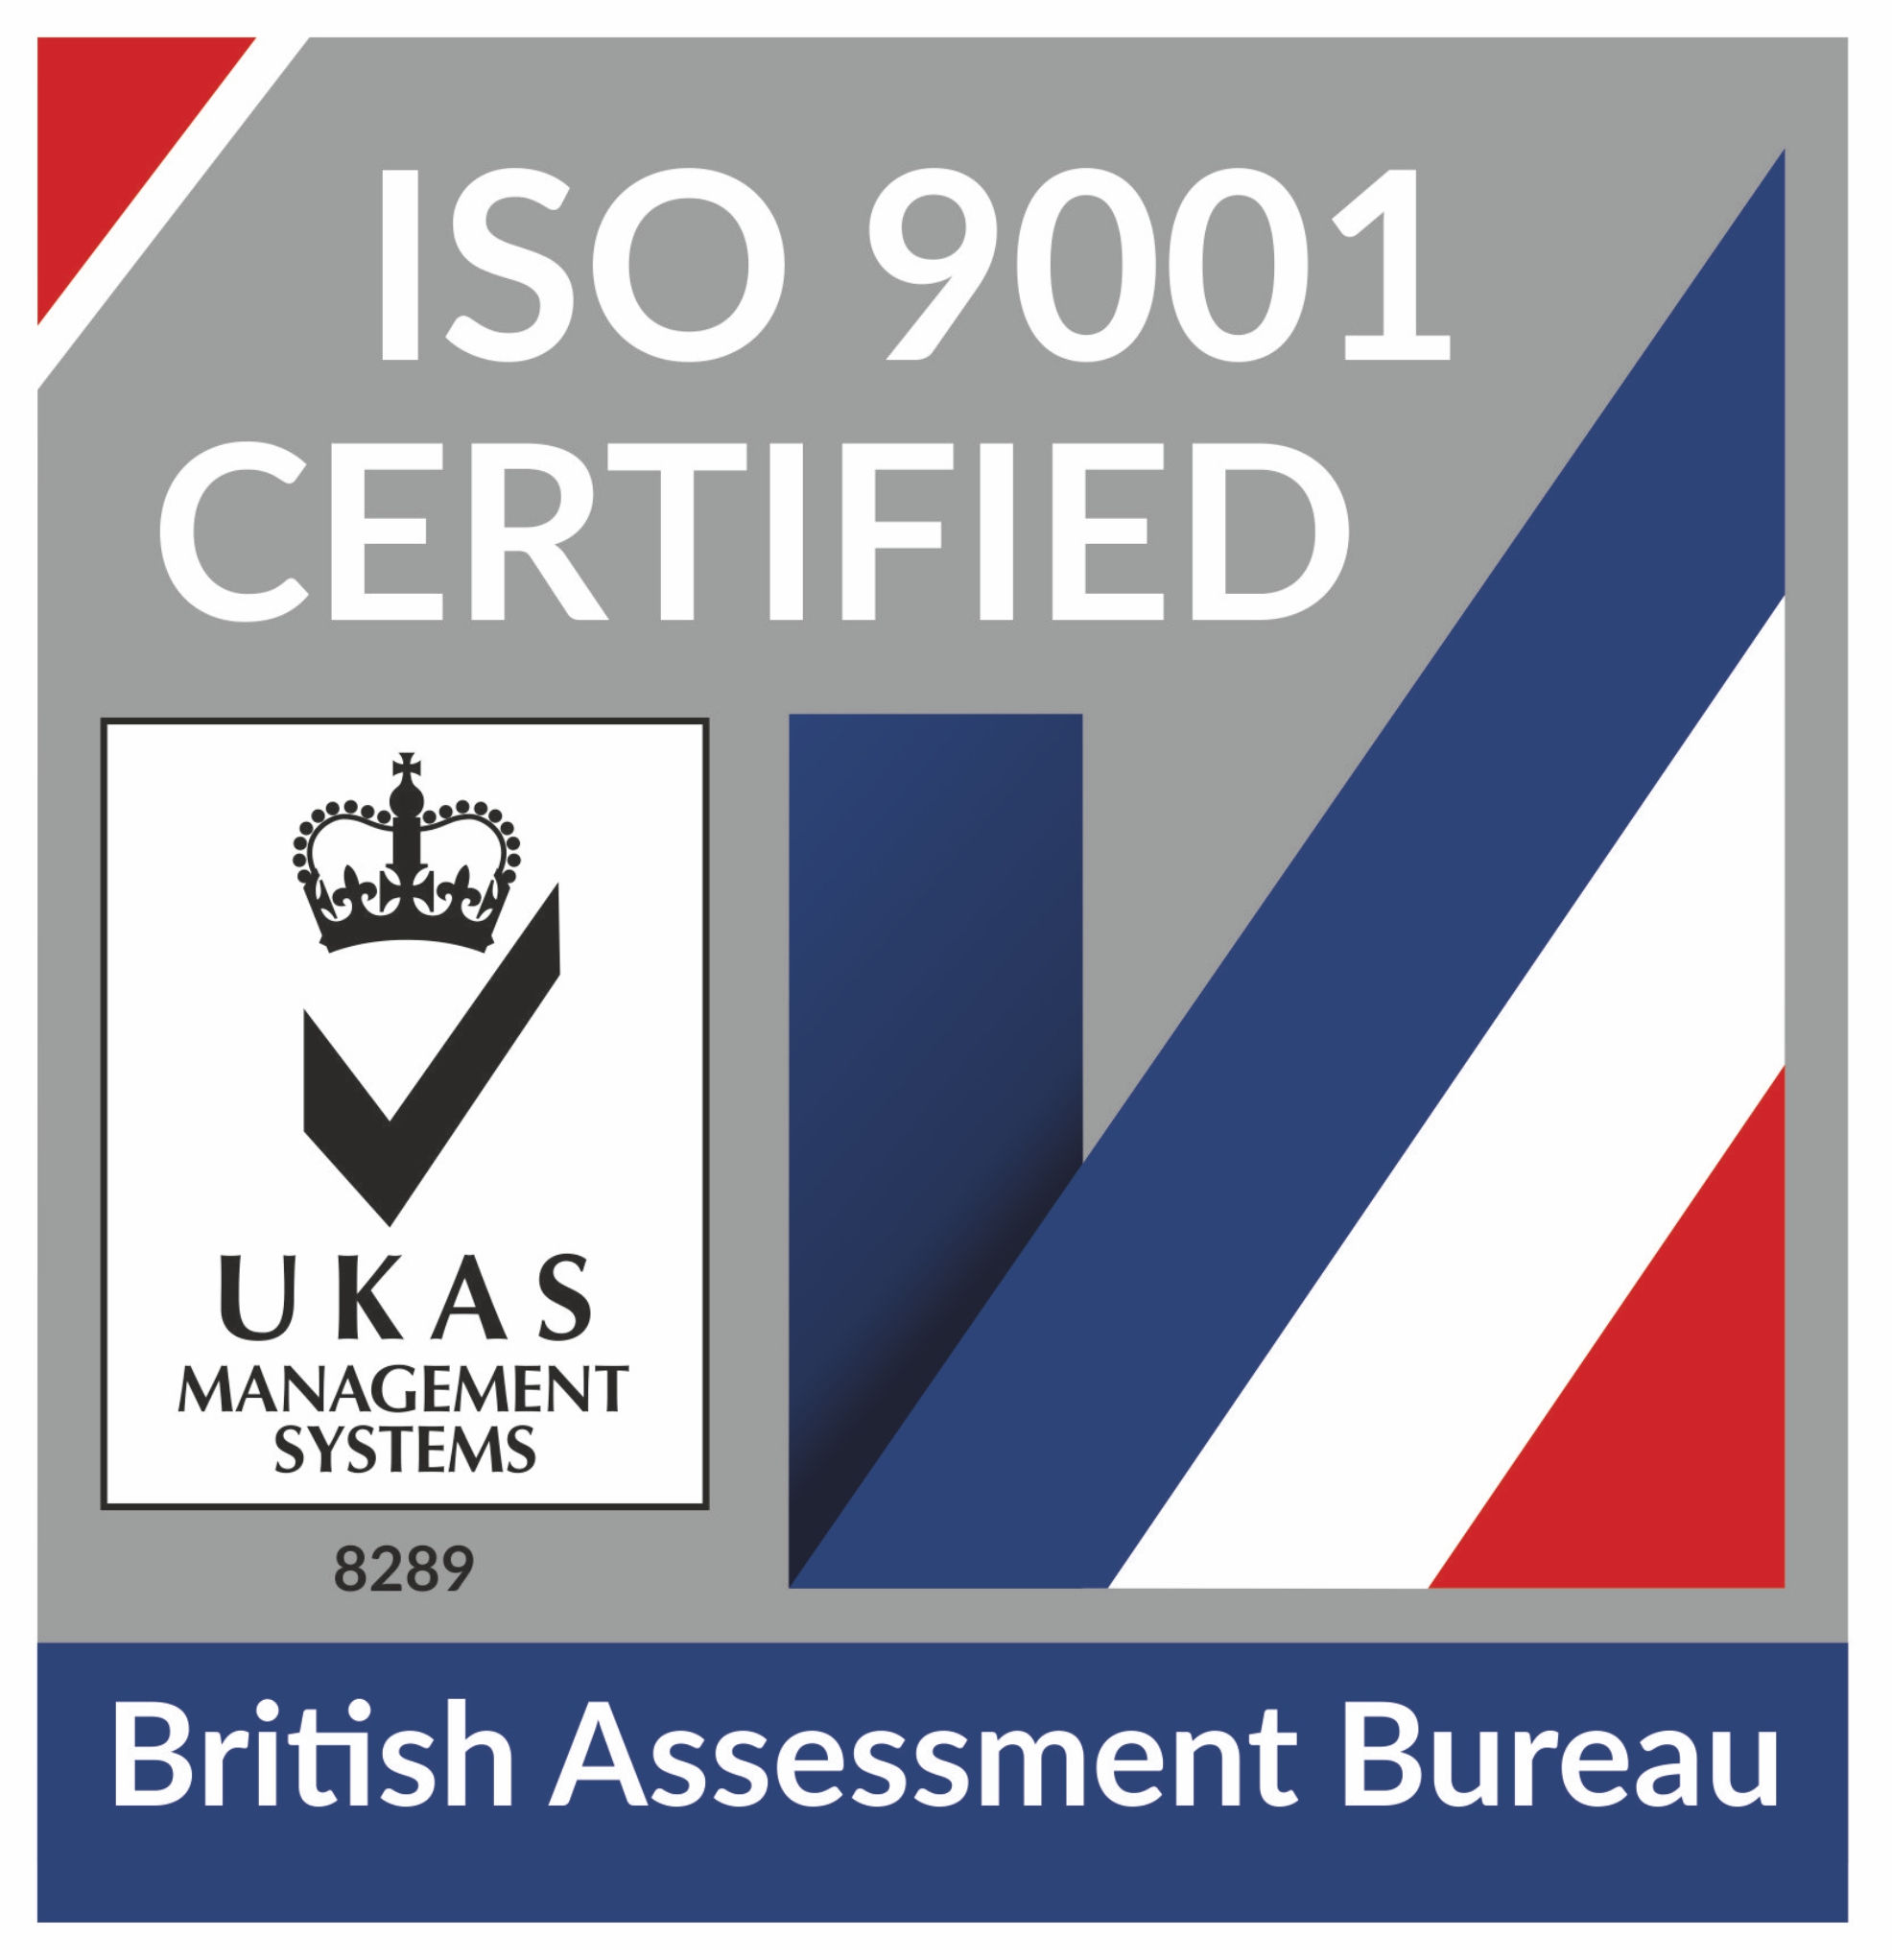 All work is conducted under our ISO 9001:2015 quality control system.